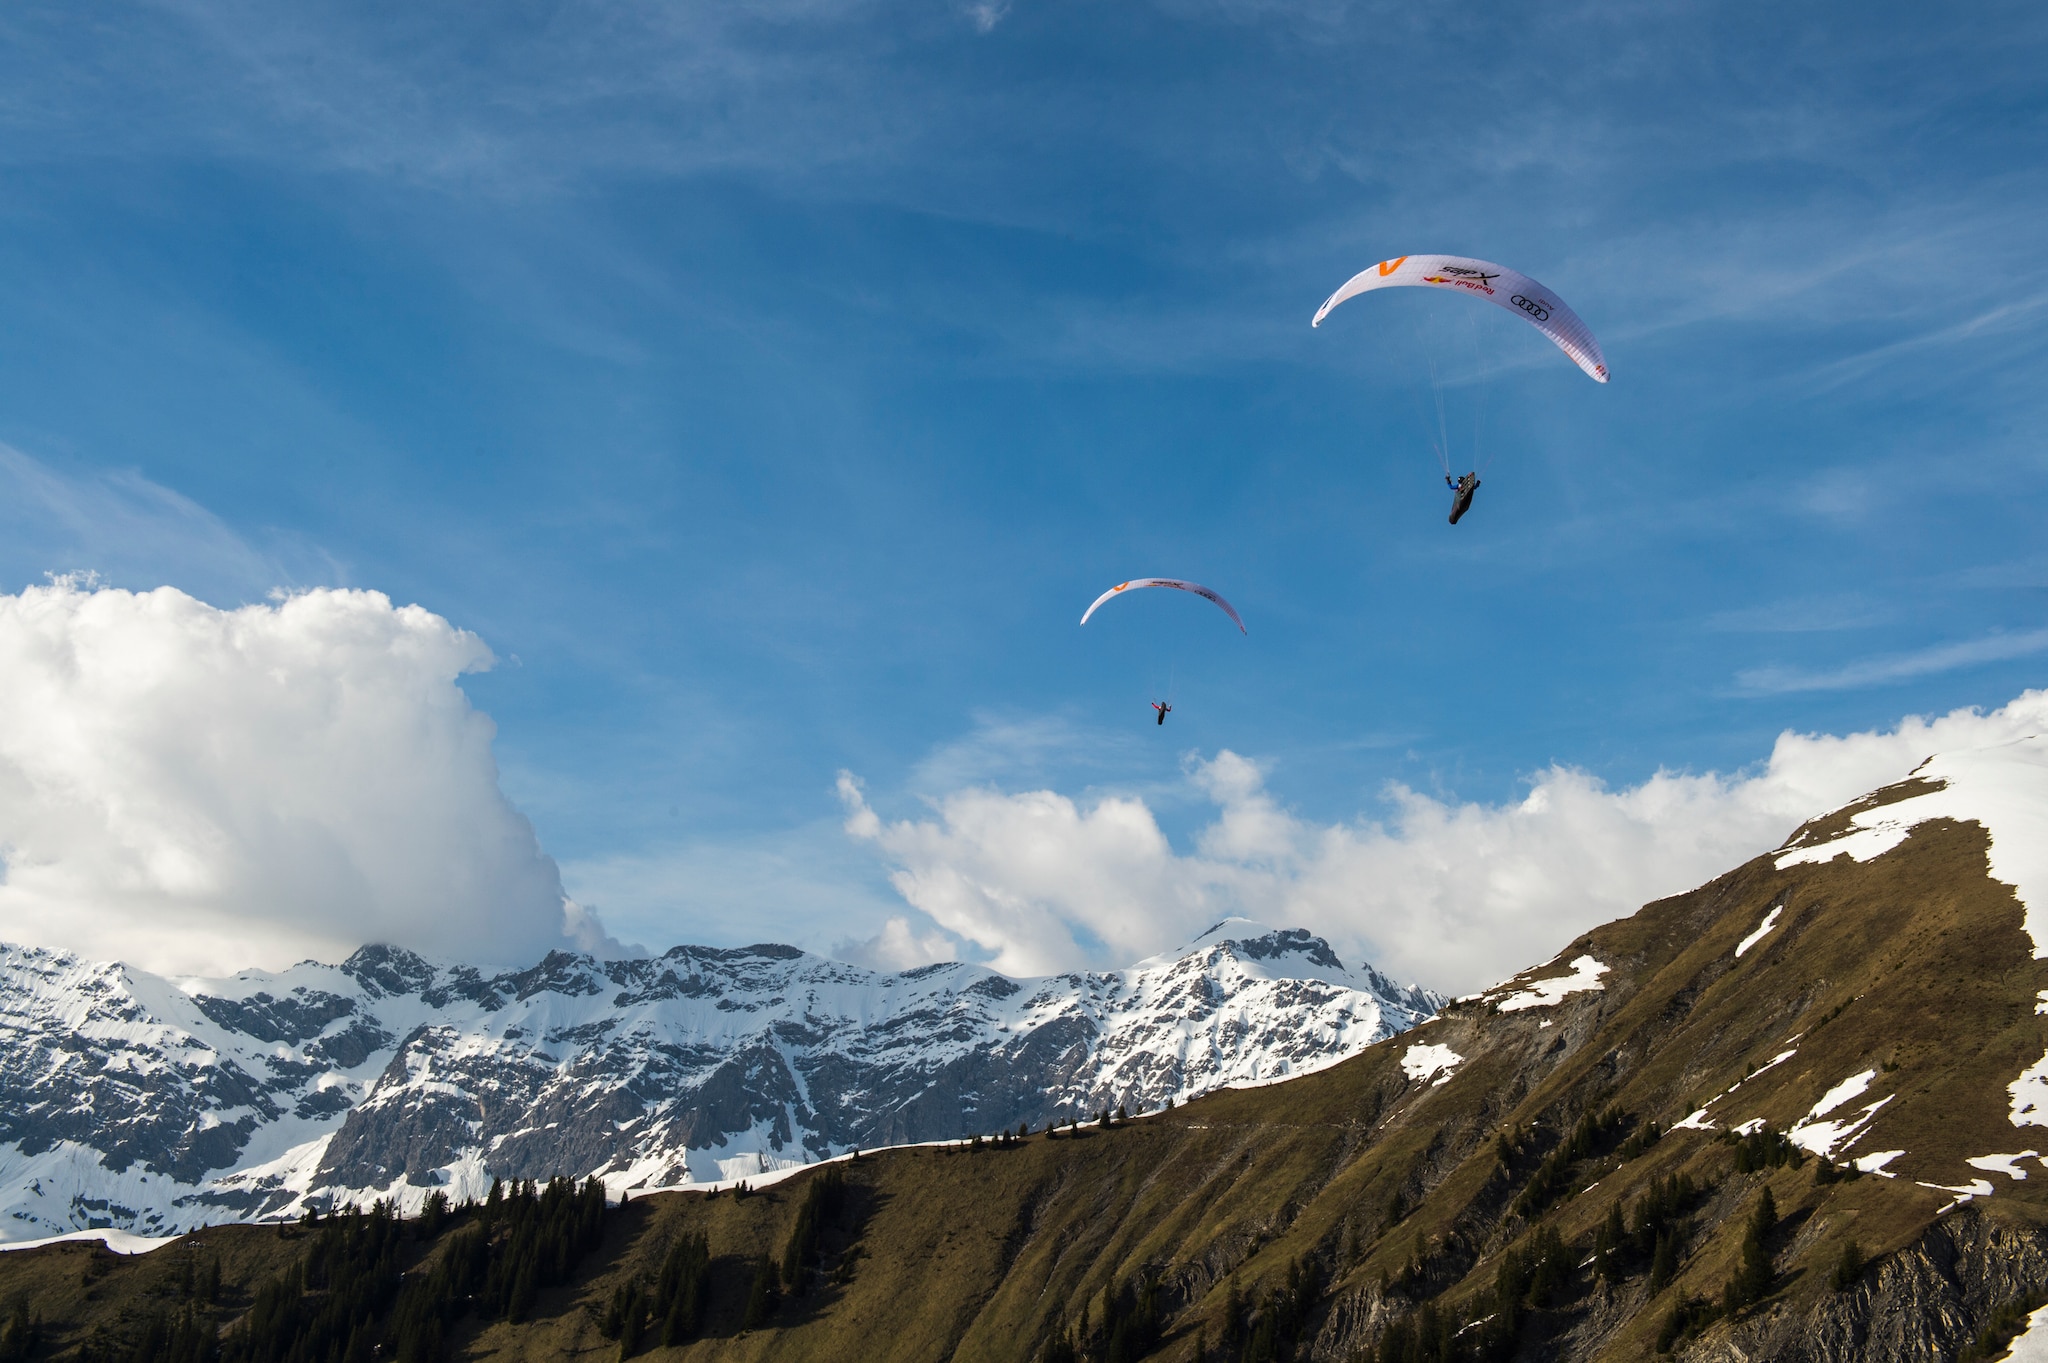 Participant flies during the Red Bull X-Alps preparations in Fanas, Switzerland on june 01, 2019